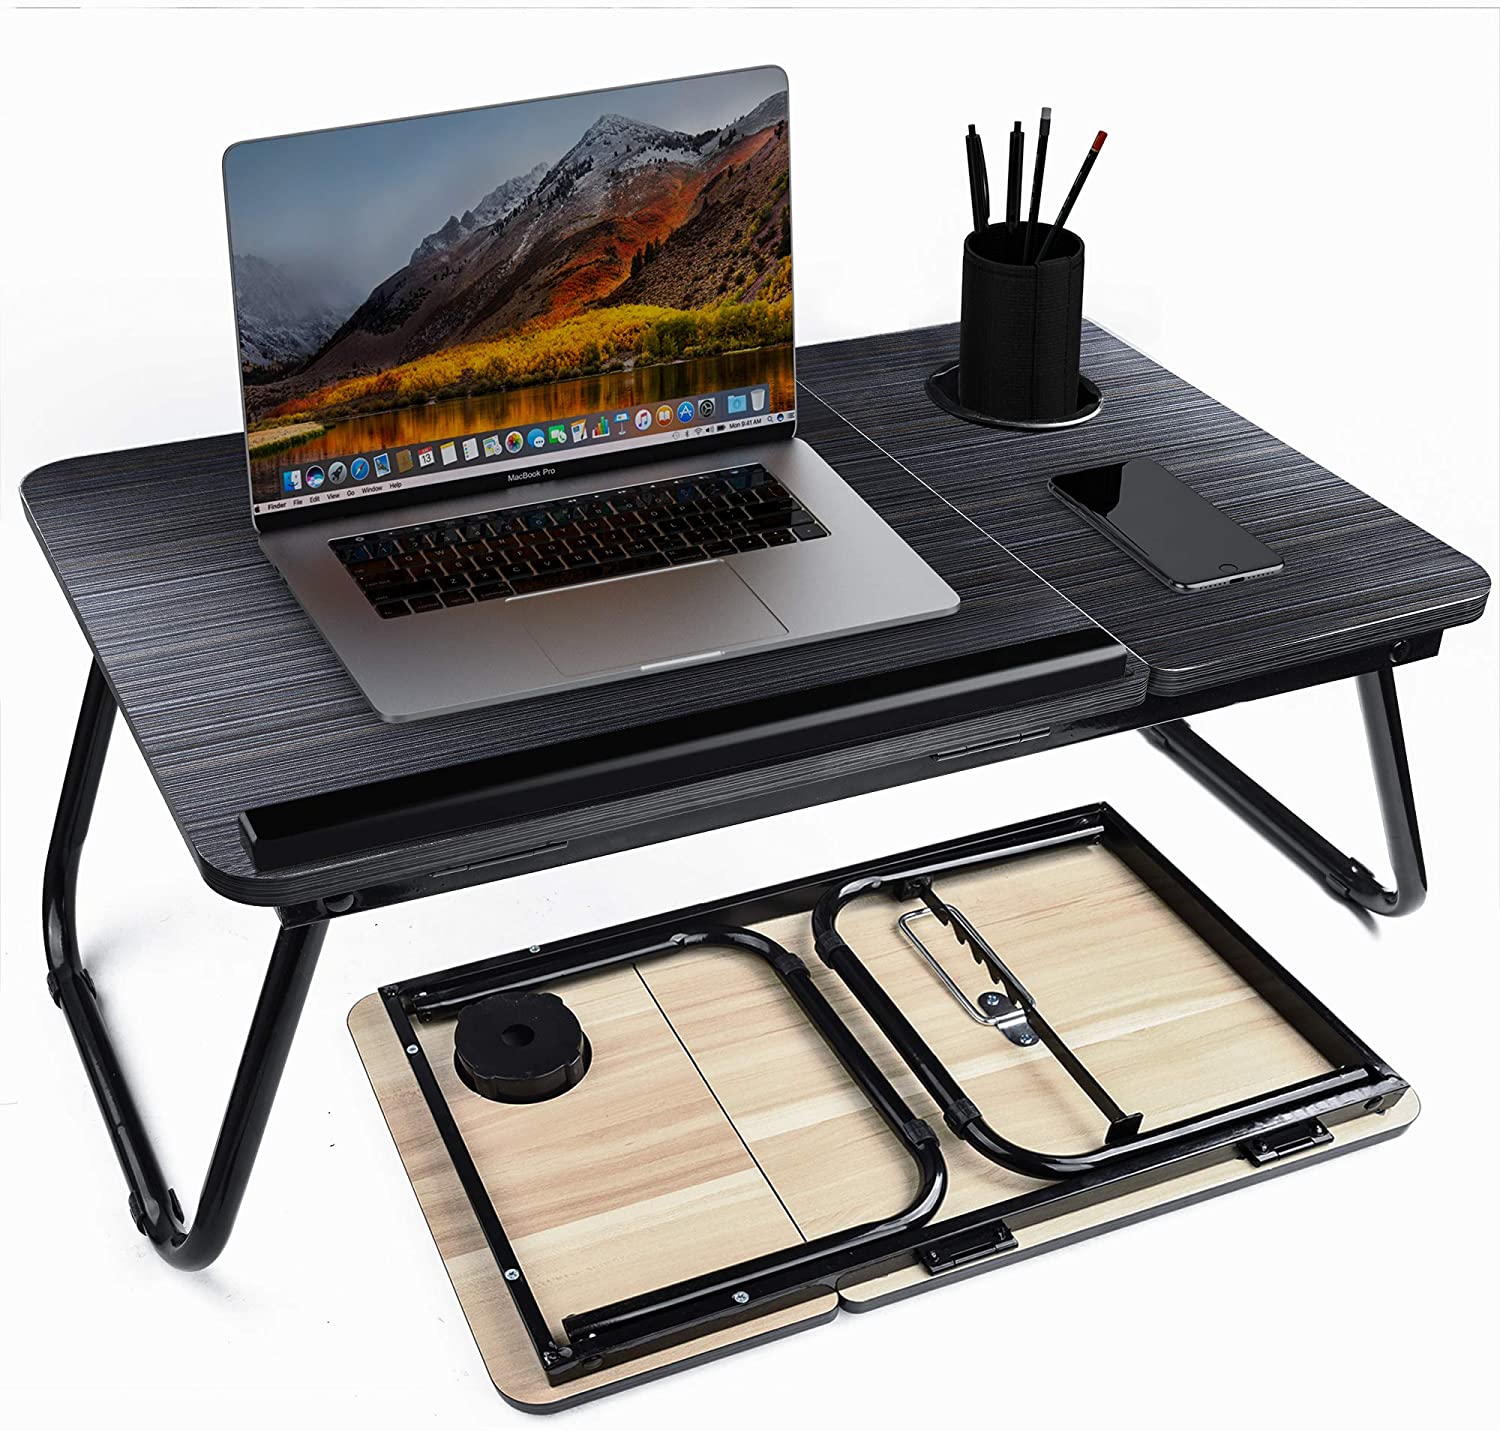 8 Best Laptop Tables For Beds Of 2021 Work From Bed The Sofa More Rare